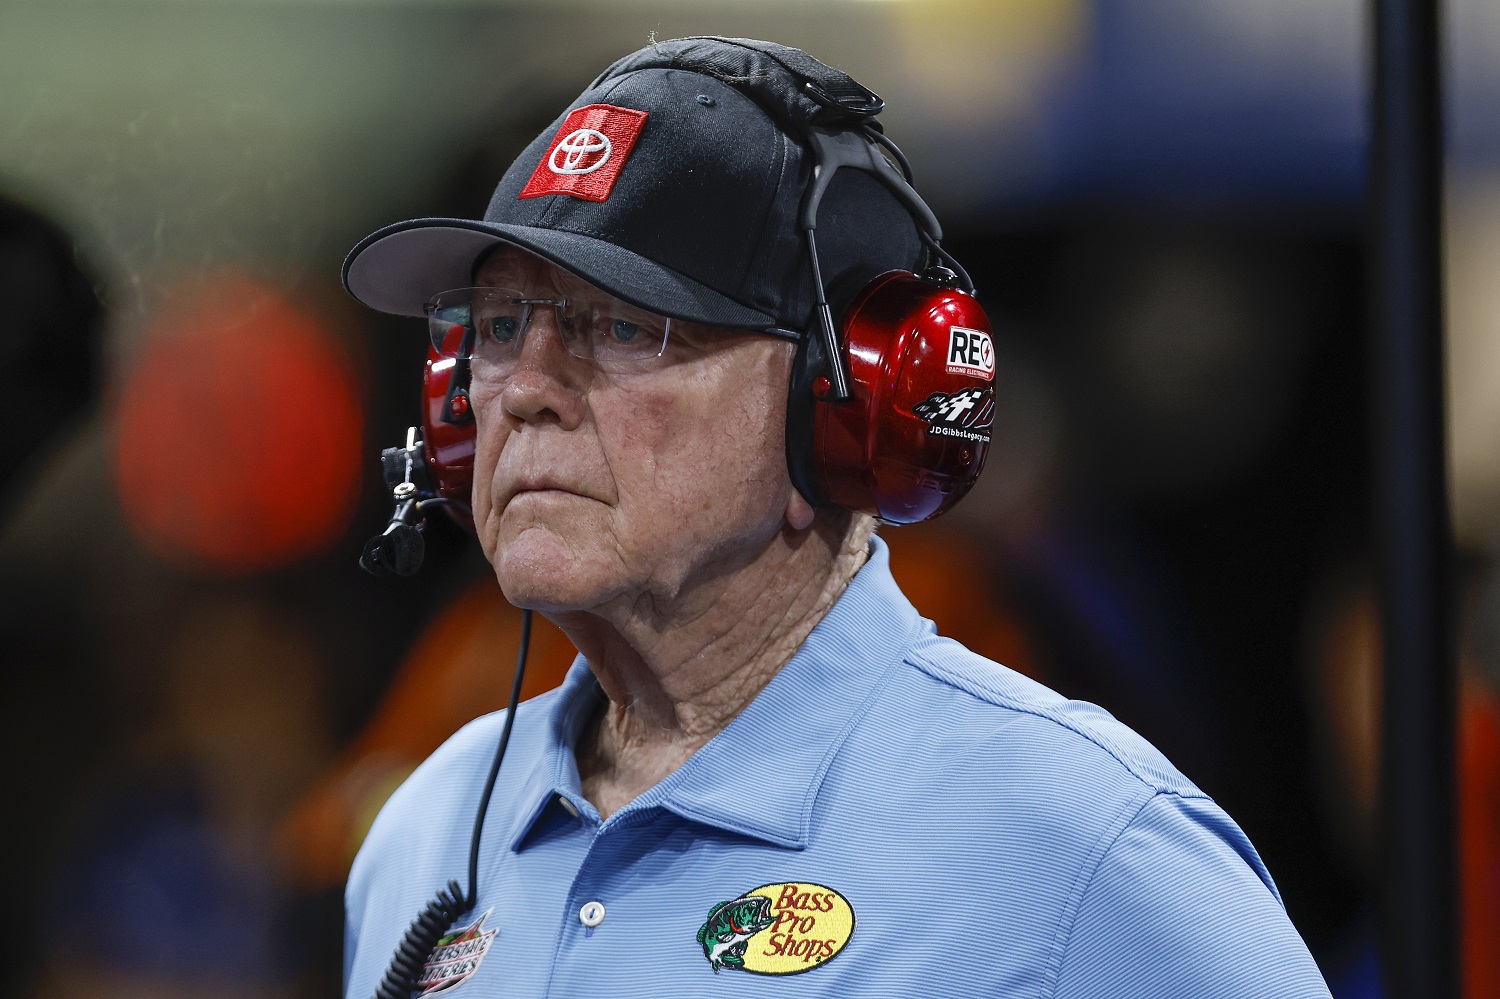 JGR owner and NASCAR Hall of Famer Joe Gibbs looks on during the Cup Series Auto Trader EchoPark Automotive 500 at Texas Motor Speedway on Sept. 25, 2022.